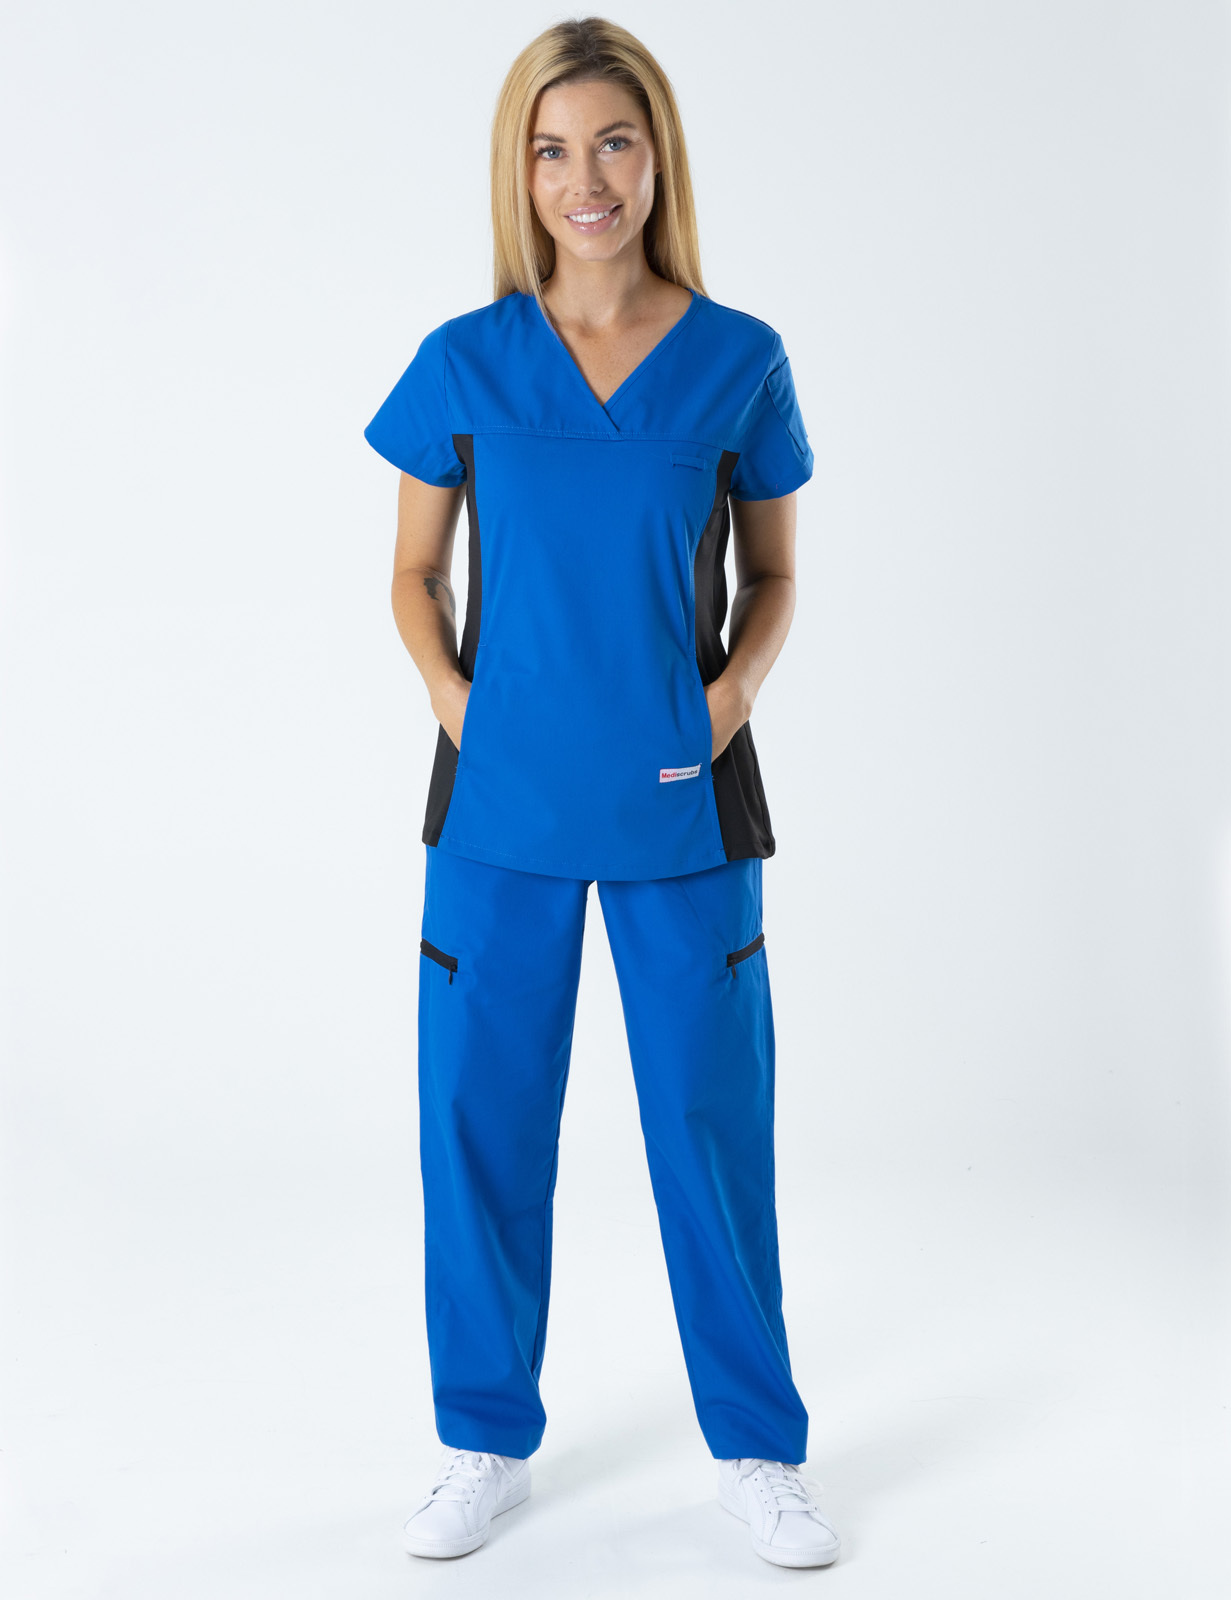 Capricorn Coast Hospital - CN (Women's Fit Spandex Scrub Top and Cargo Pants in Royal incl Logos)